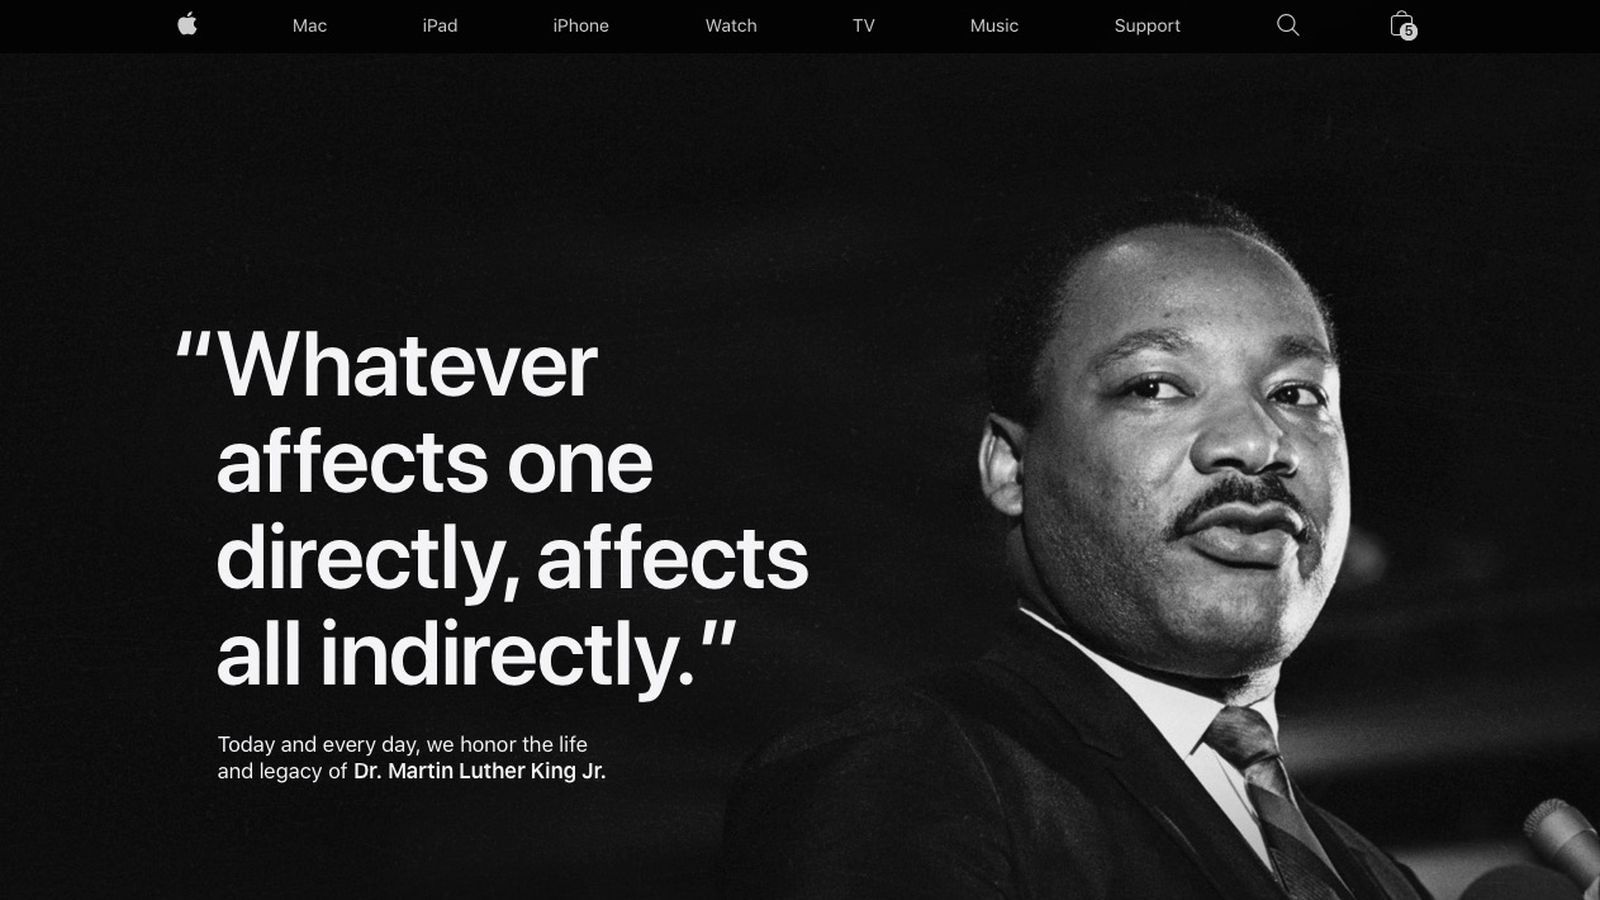 Apple and Tim Cook Commemorate Dr. Martin Luther King, Jr